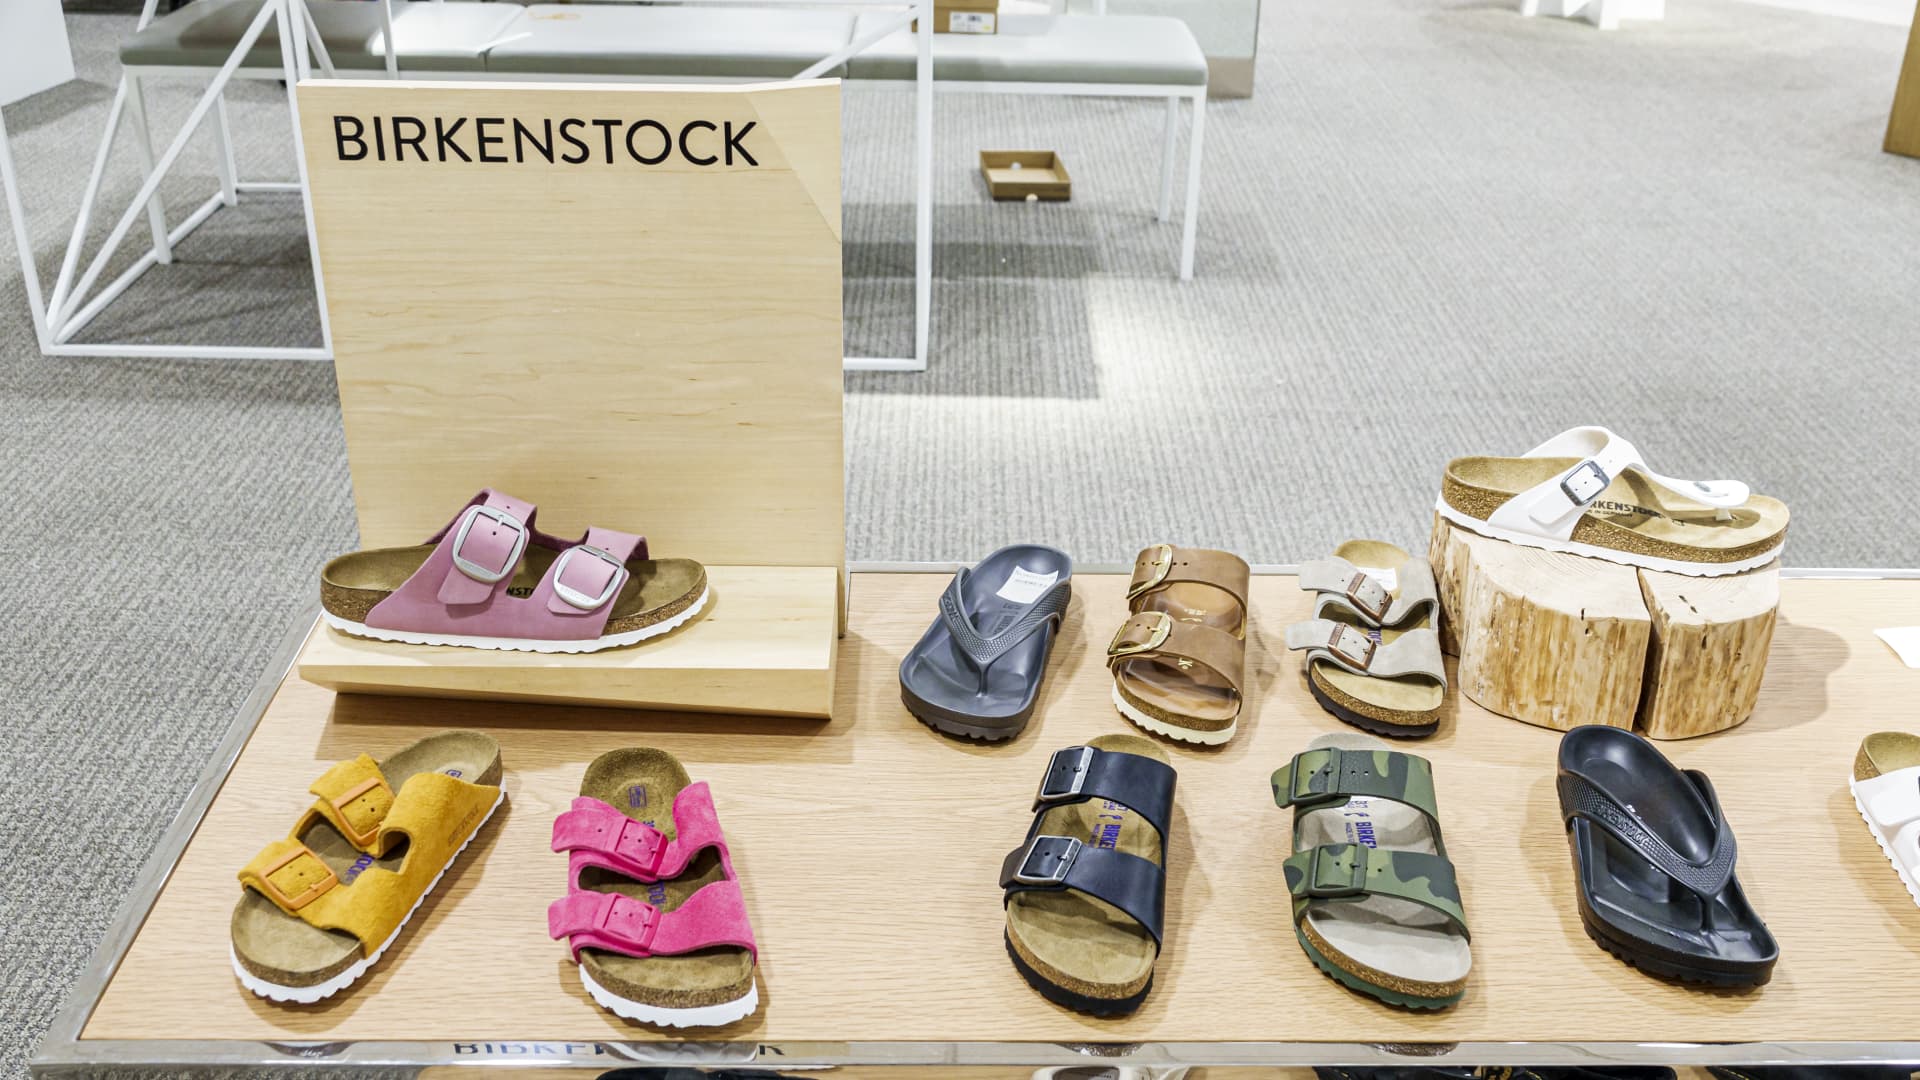 Birkenstock warns in IPO filing that knock-offs on Facebook are a top risk